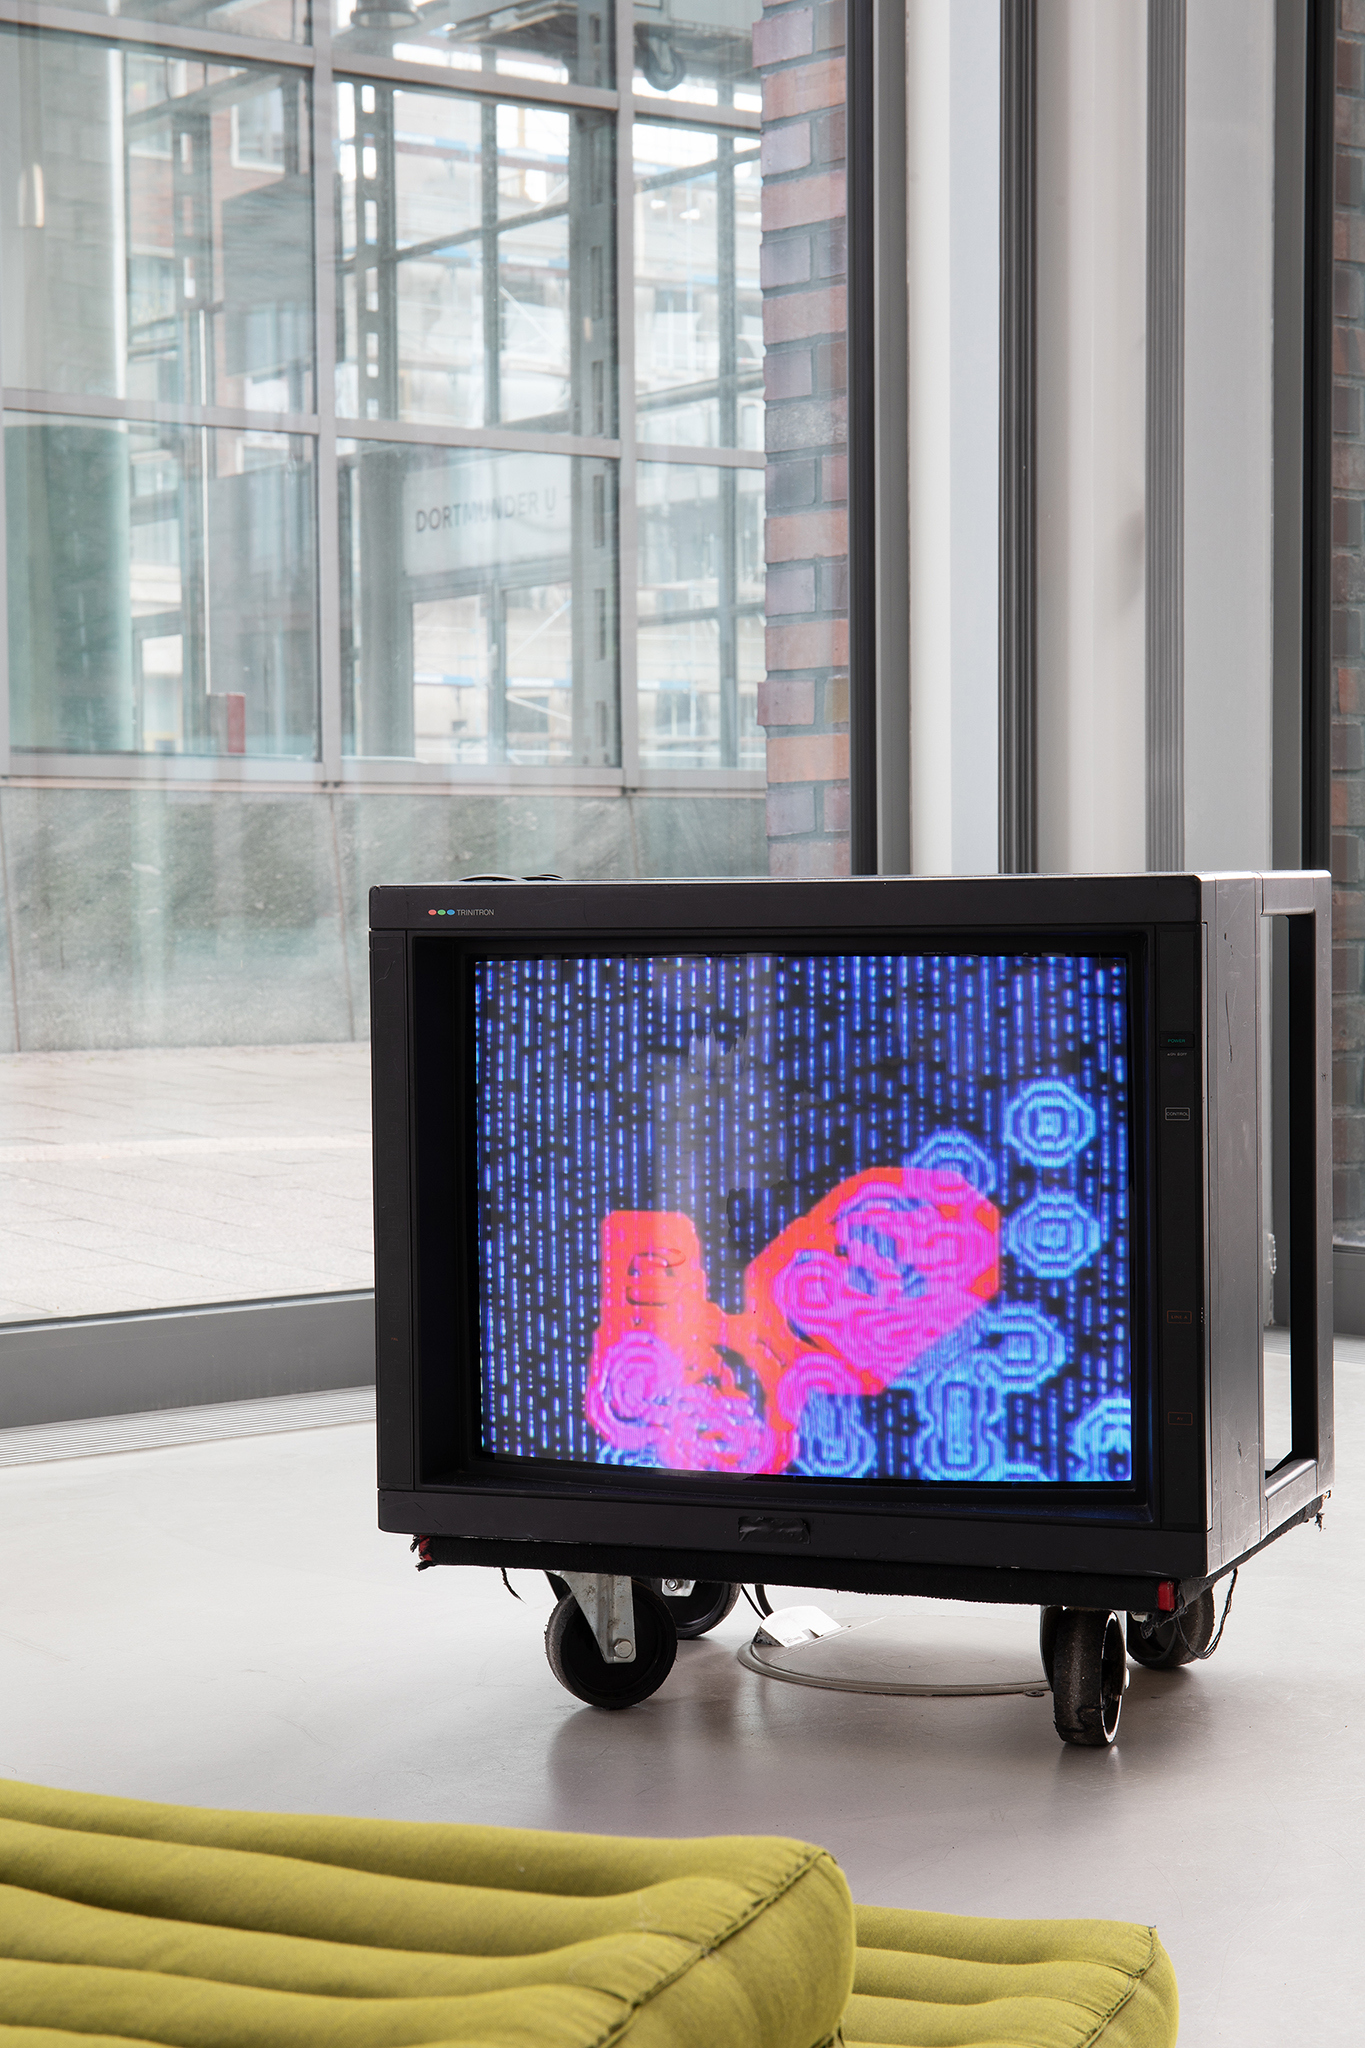 Lillian Schwartz, Early Films, 1970-1974. exhibition view ‘Unselfing’, Dortmunder Kunstverein, 2024, Photo: Jens Franke. Courtesy: the artist, the collection of the Henry Ford